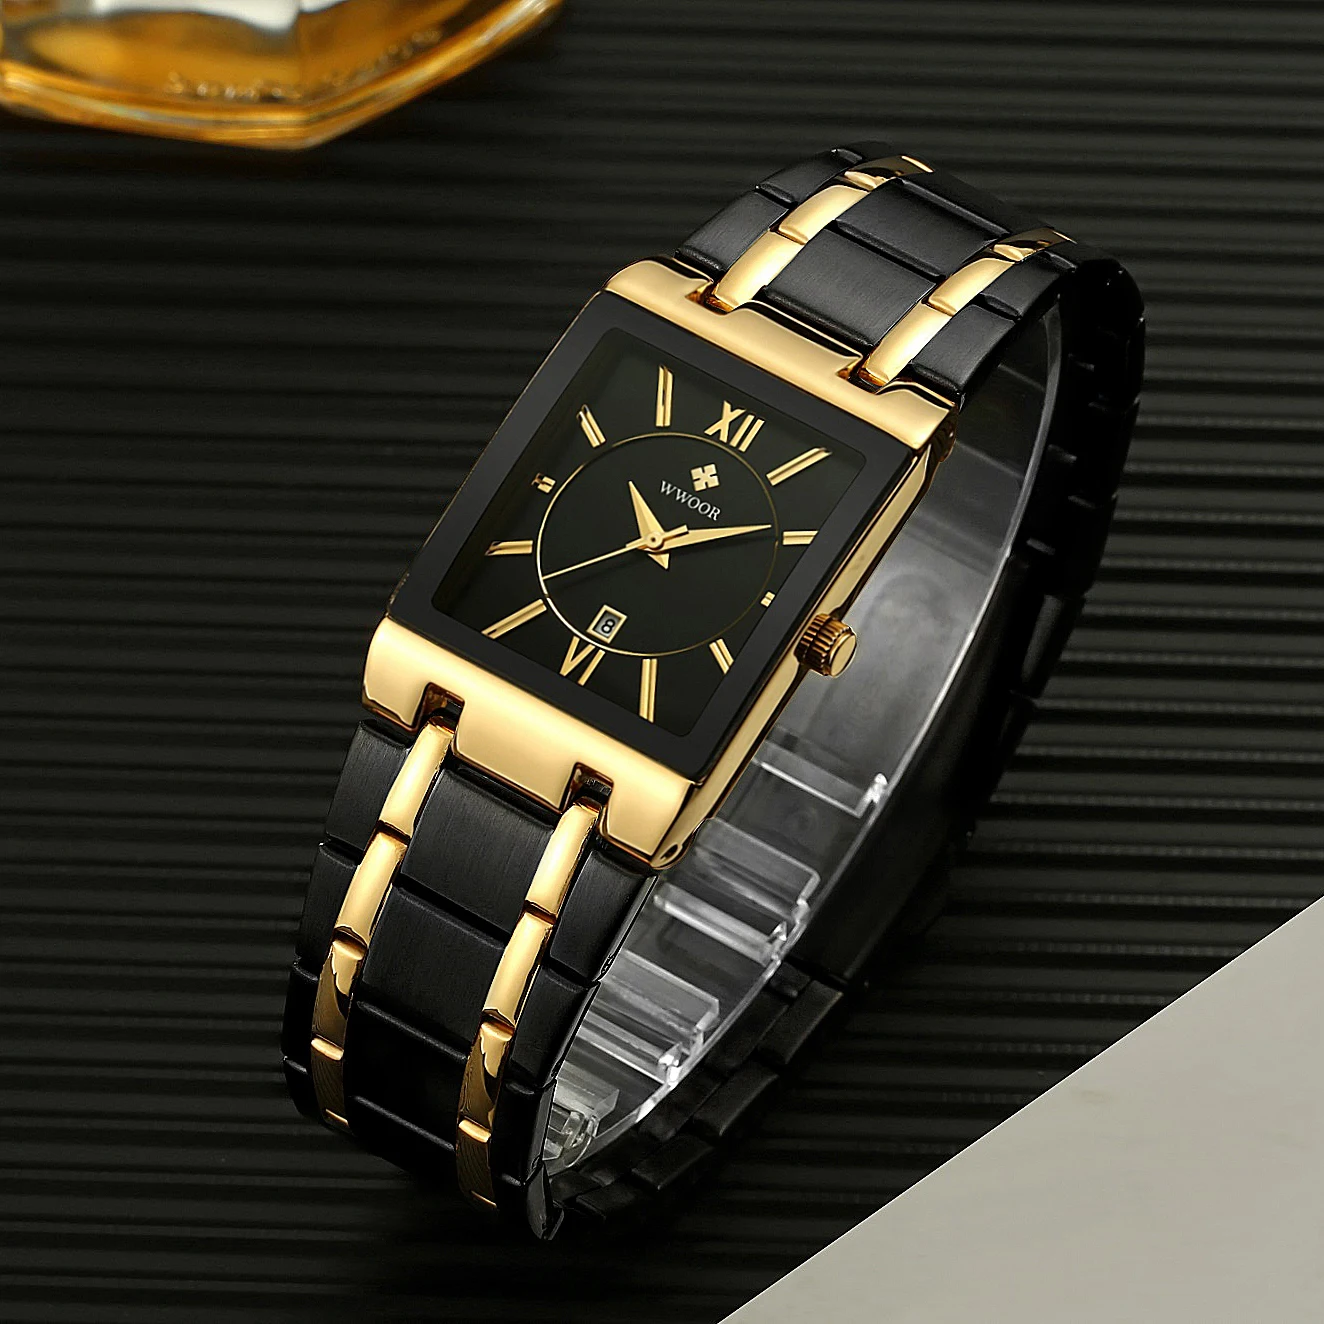 Wwoor 8858 Branded Quartz Wrist Watch Luxury Stainless Steel Relogio  Masculino Mens Watches - Buy Brand Watches Wholesale,Watch Stainless Steel  Wristwatch,Mens Watches Top Brand Product on Alibaba.com